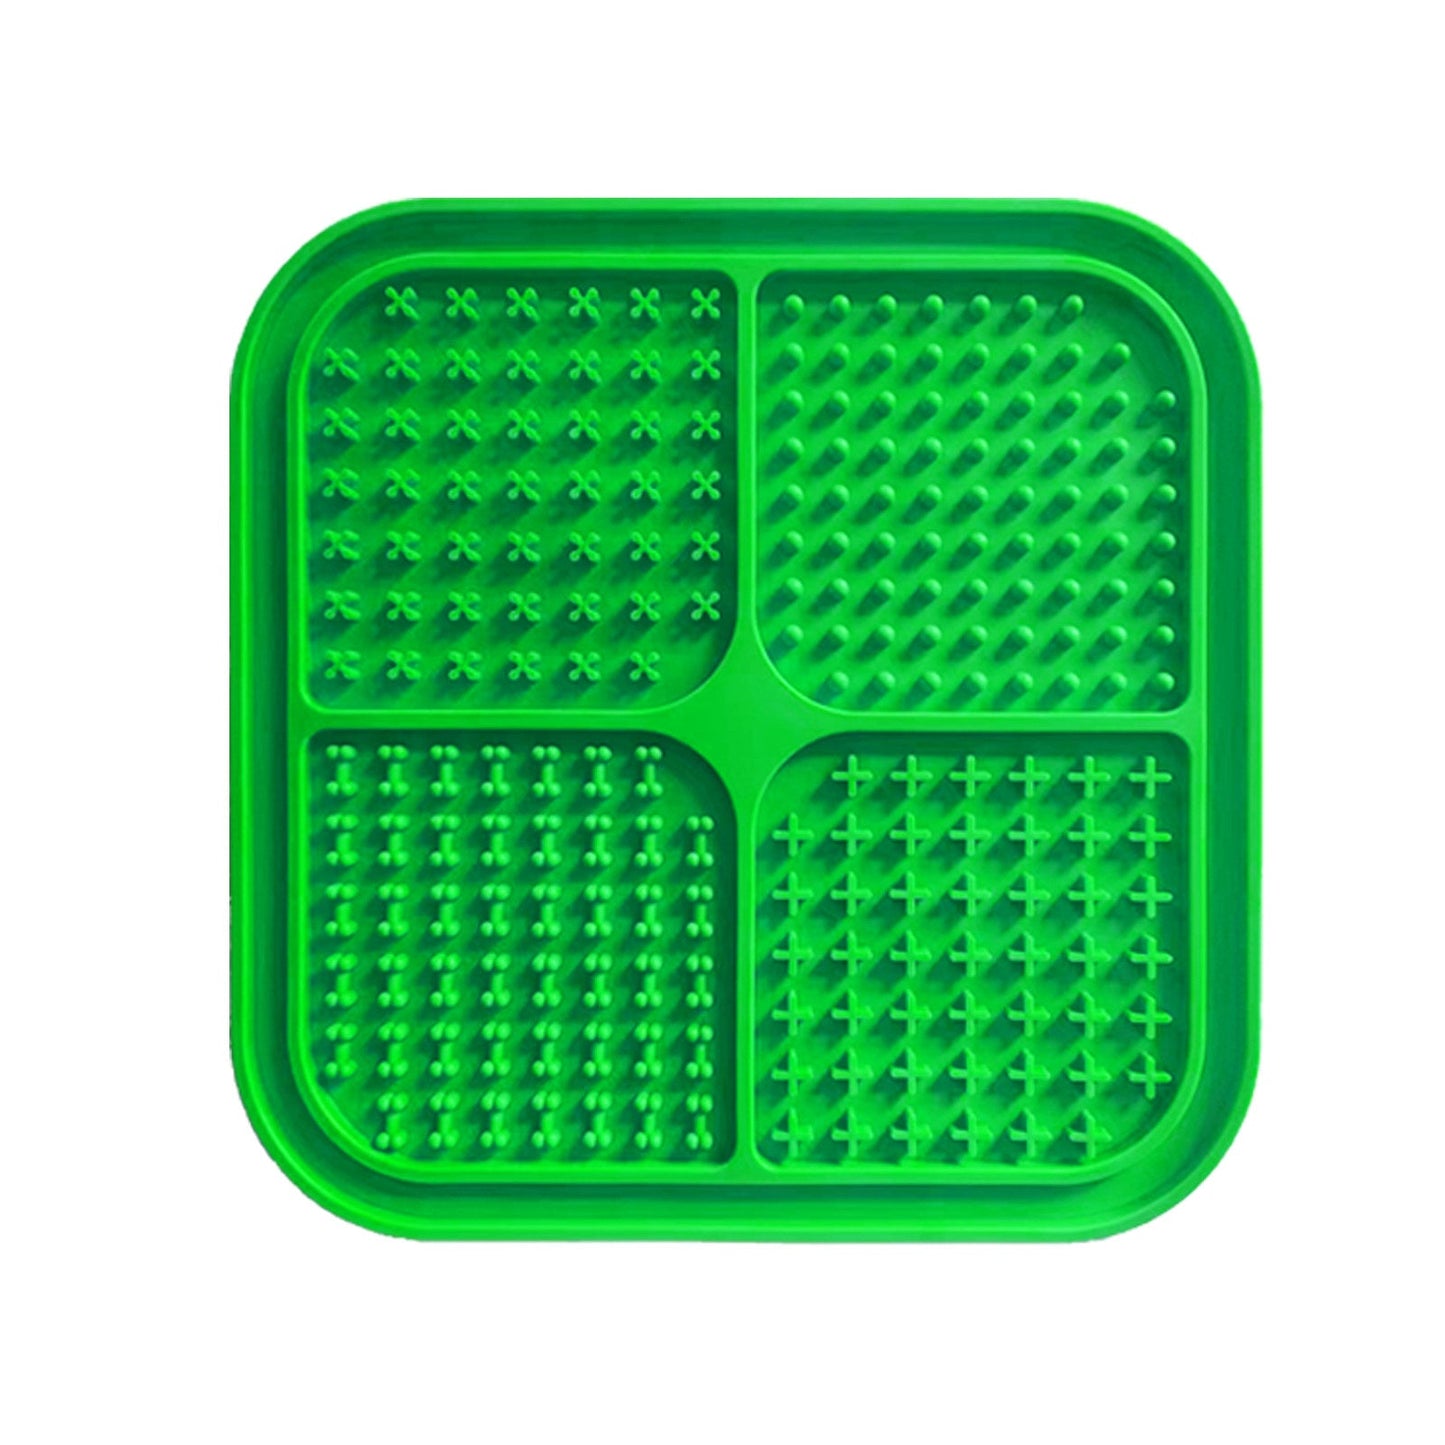 Pawfriends 4in1 Silicone Pet Lick Mat Green